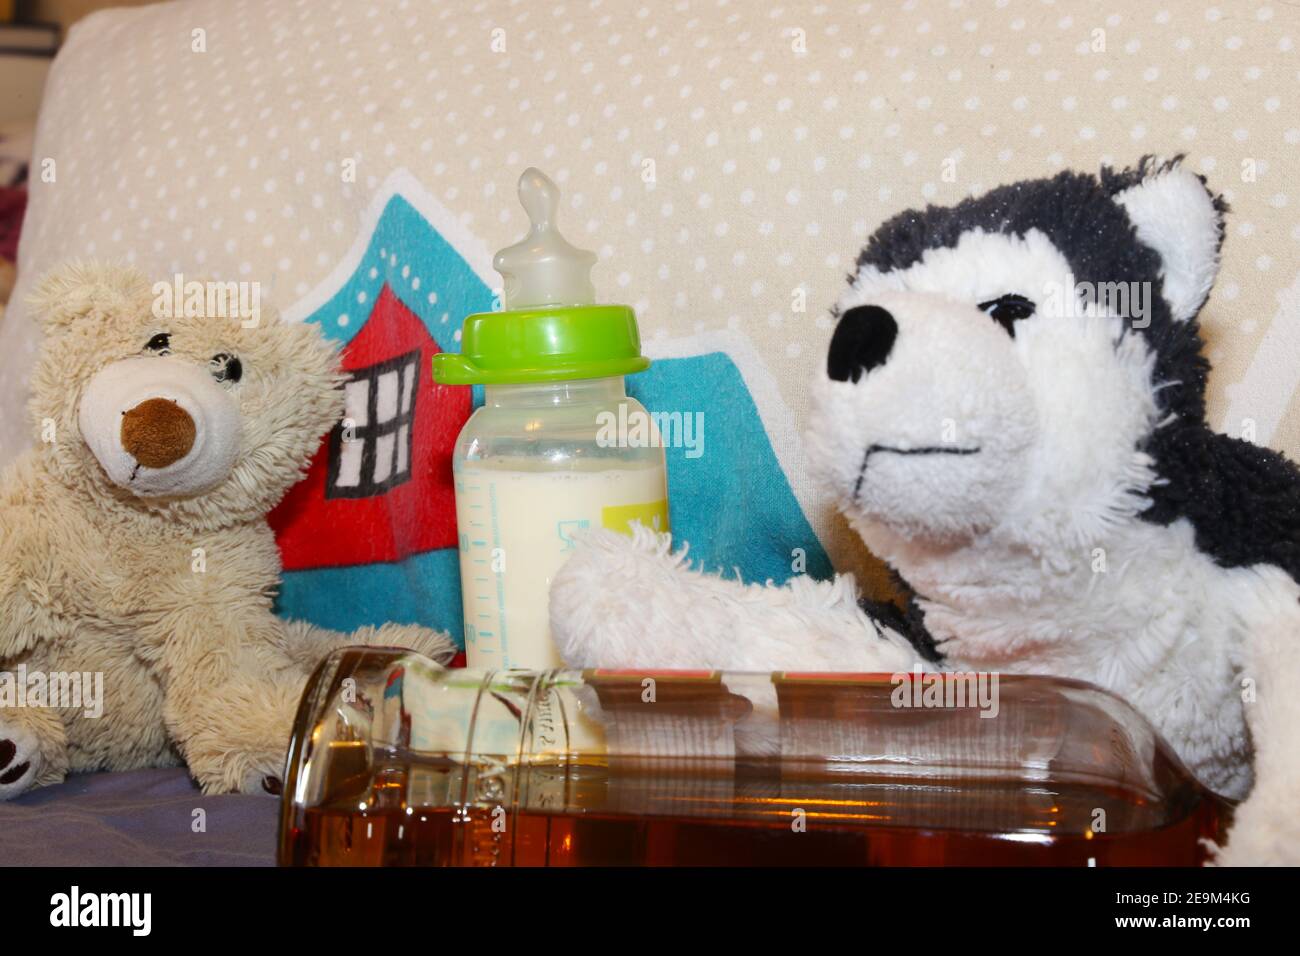 Symbol image of alcohol addiction in parents: cuddly toys, baby bottle and alcohol Stock Photo